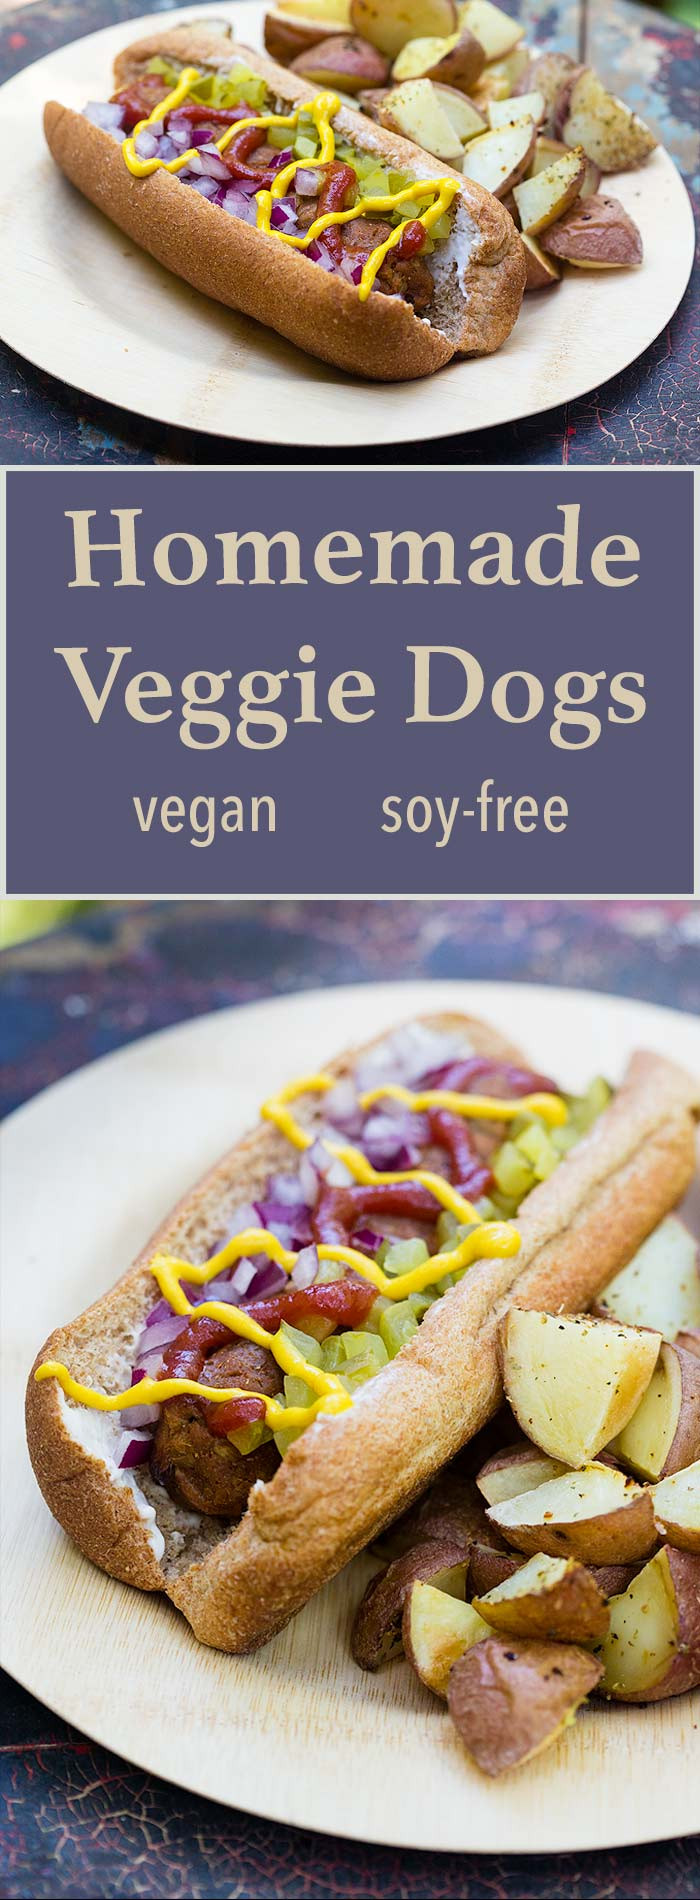 Best Vegan Hot Dogs
 what is in a vegan hot dog